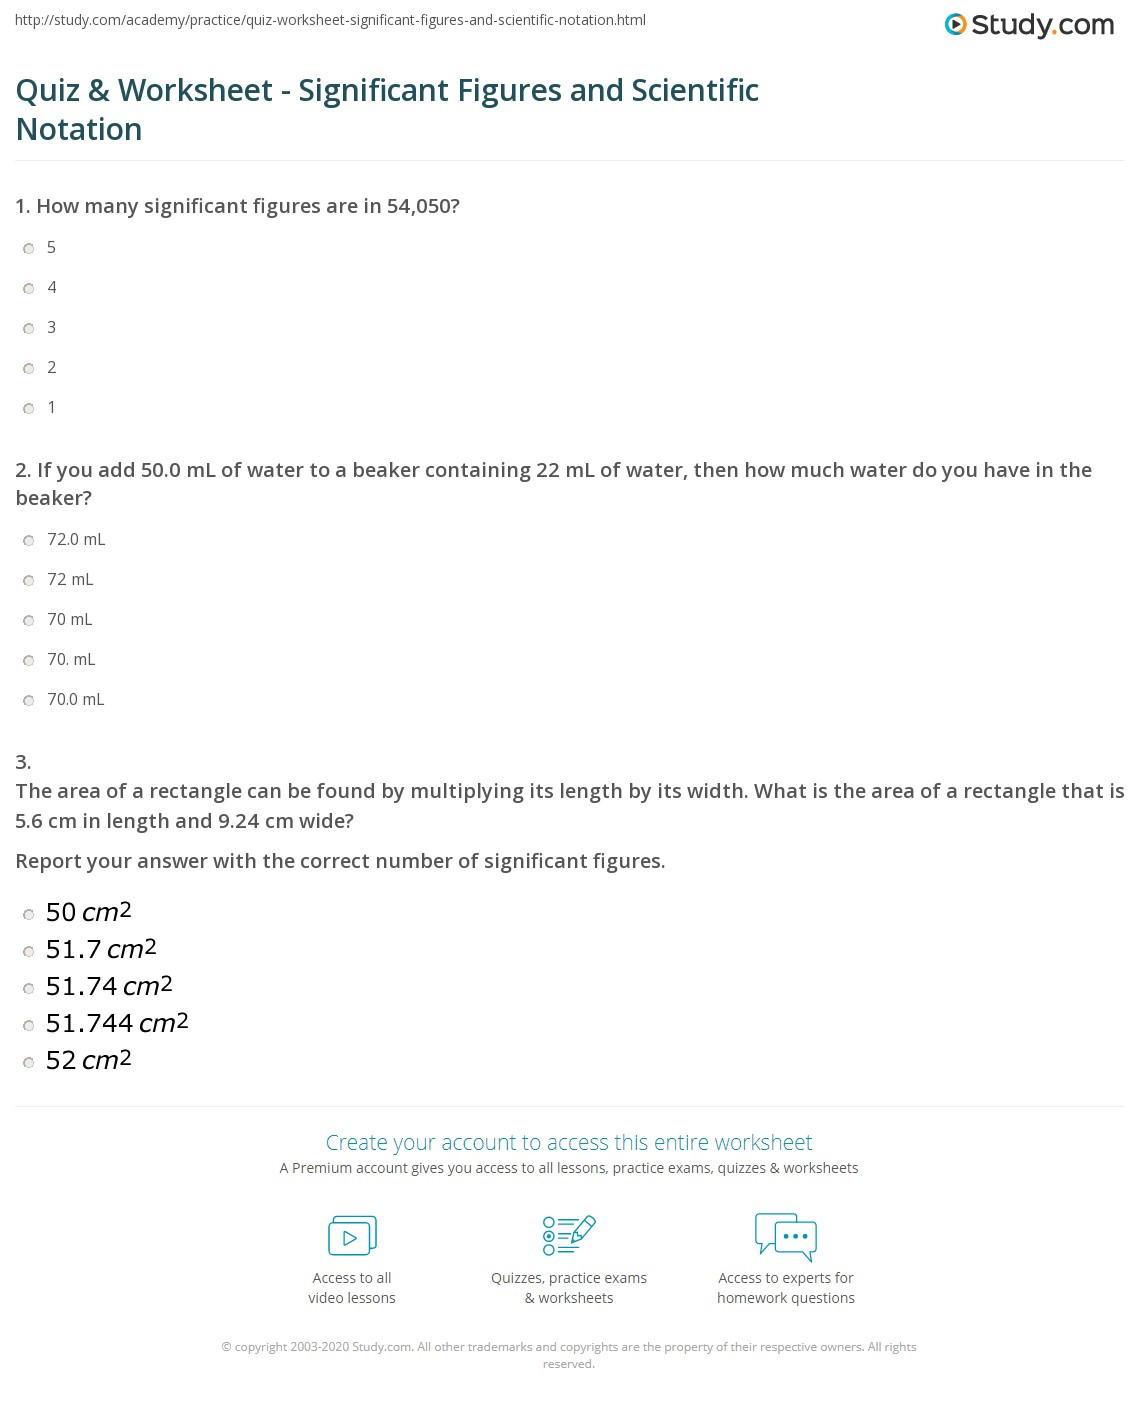 Significant Figures Worksheet Answers Quiz &amp; Worksheet Significant Figures and Scientific